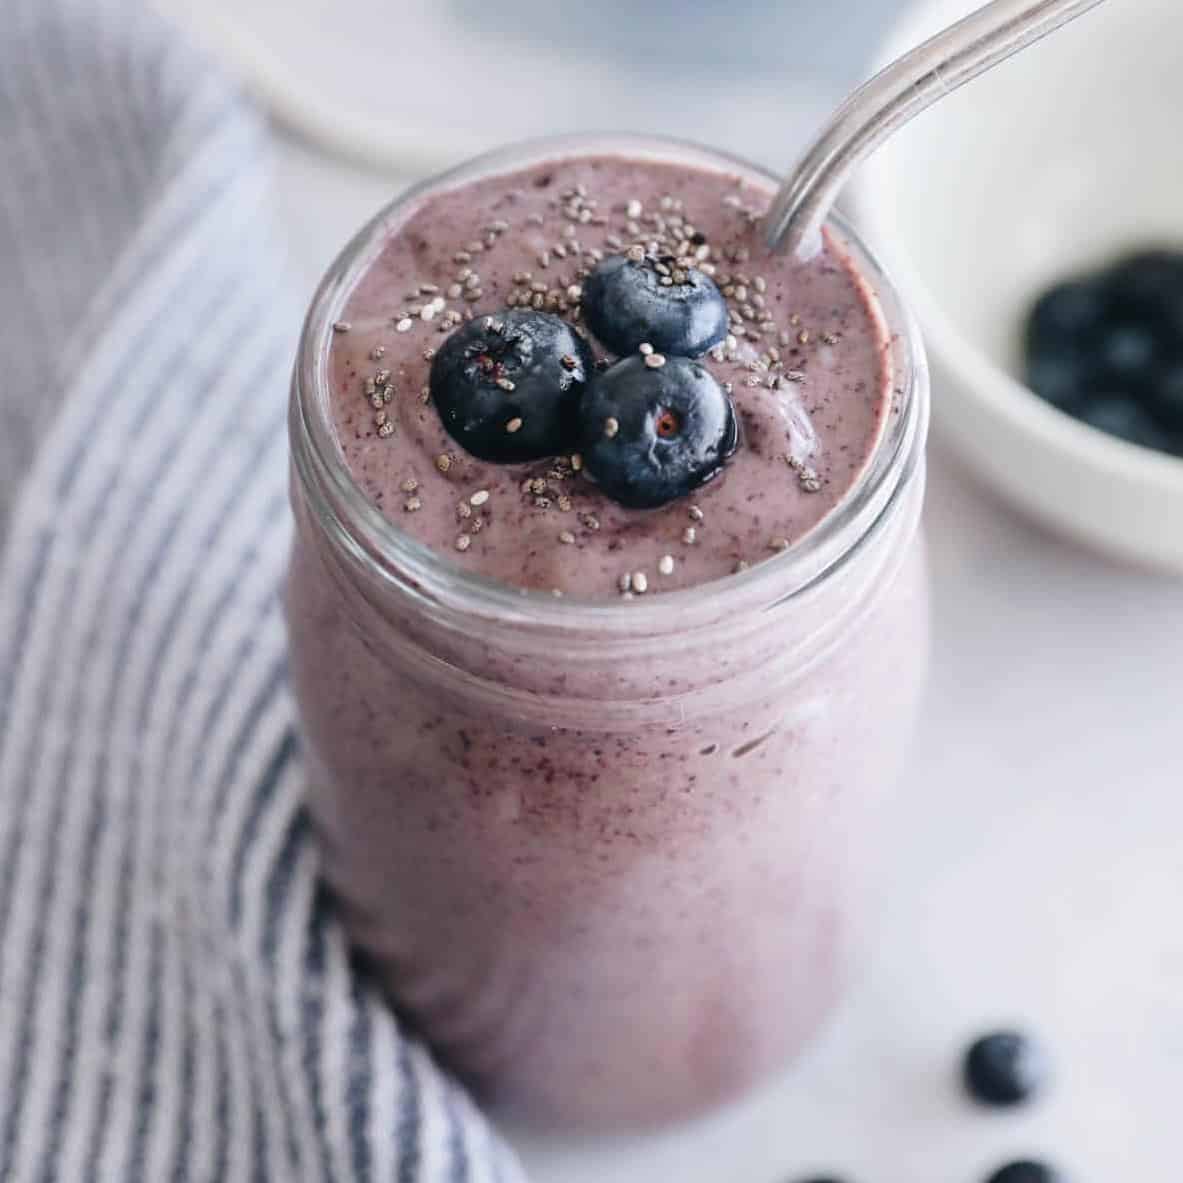  This Booberry Yogo Smoothie is a refreshing treat any time of day.